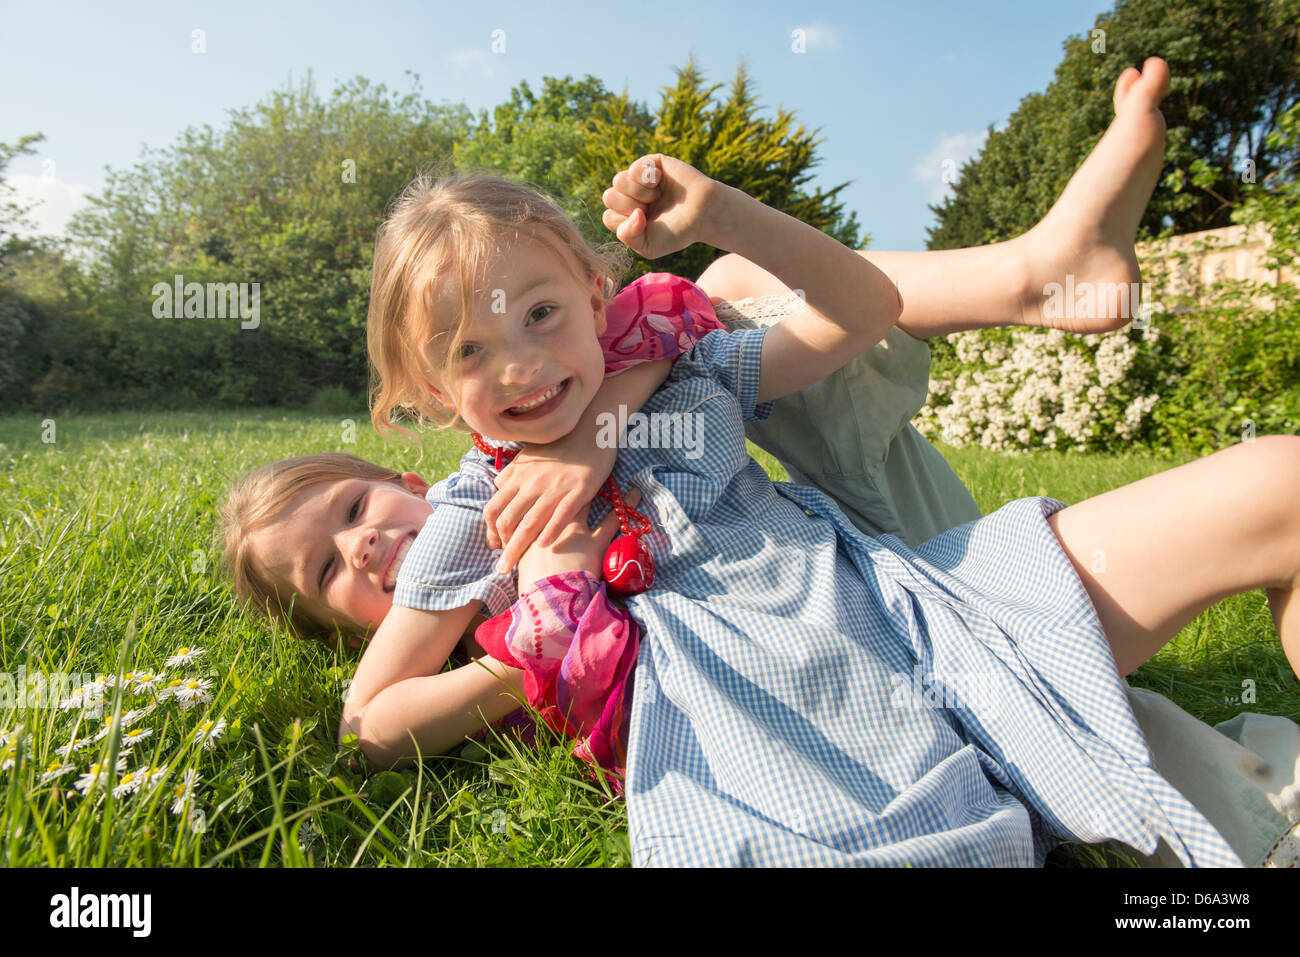 Girls playing together in grassy field Stock Photo - Alamy